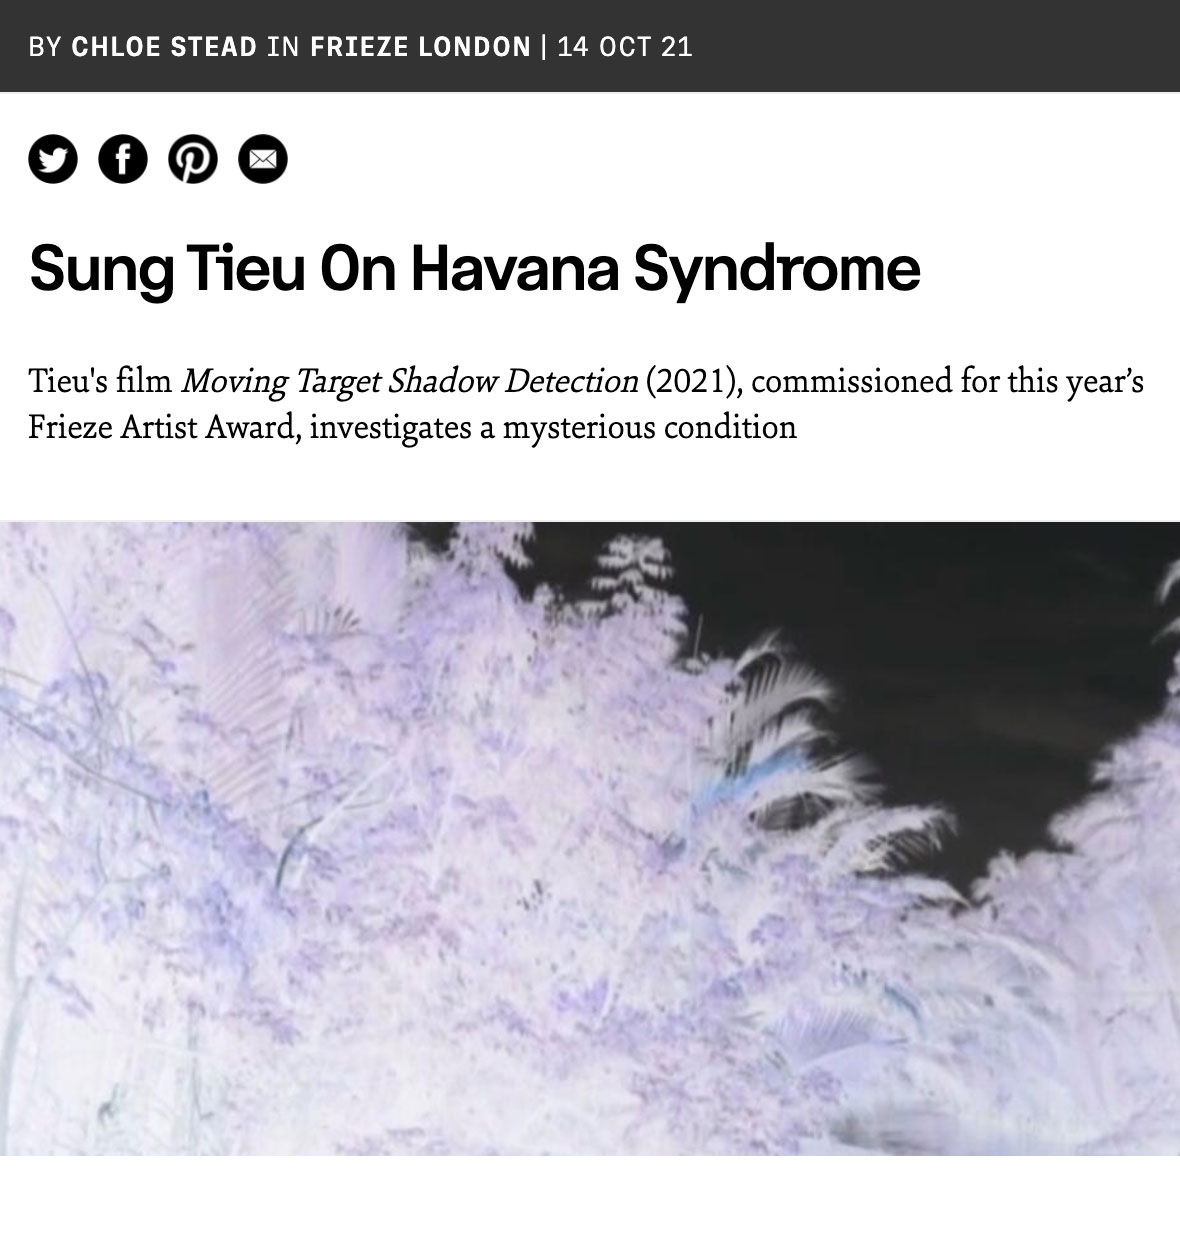 Sung Tieu On Havana Syndrome | By Chloe Stead in FRIEZE London, October 14th, 2021